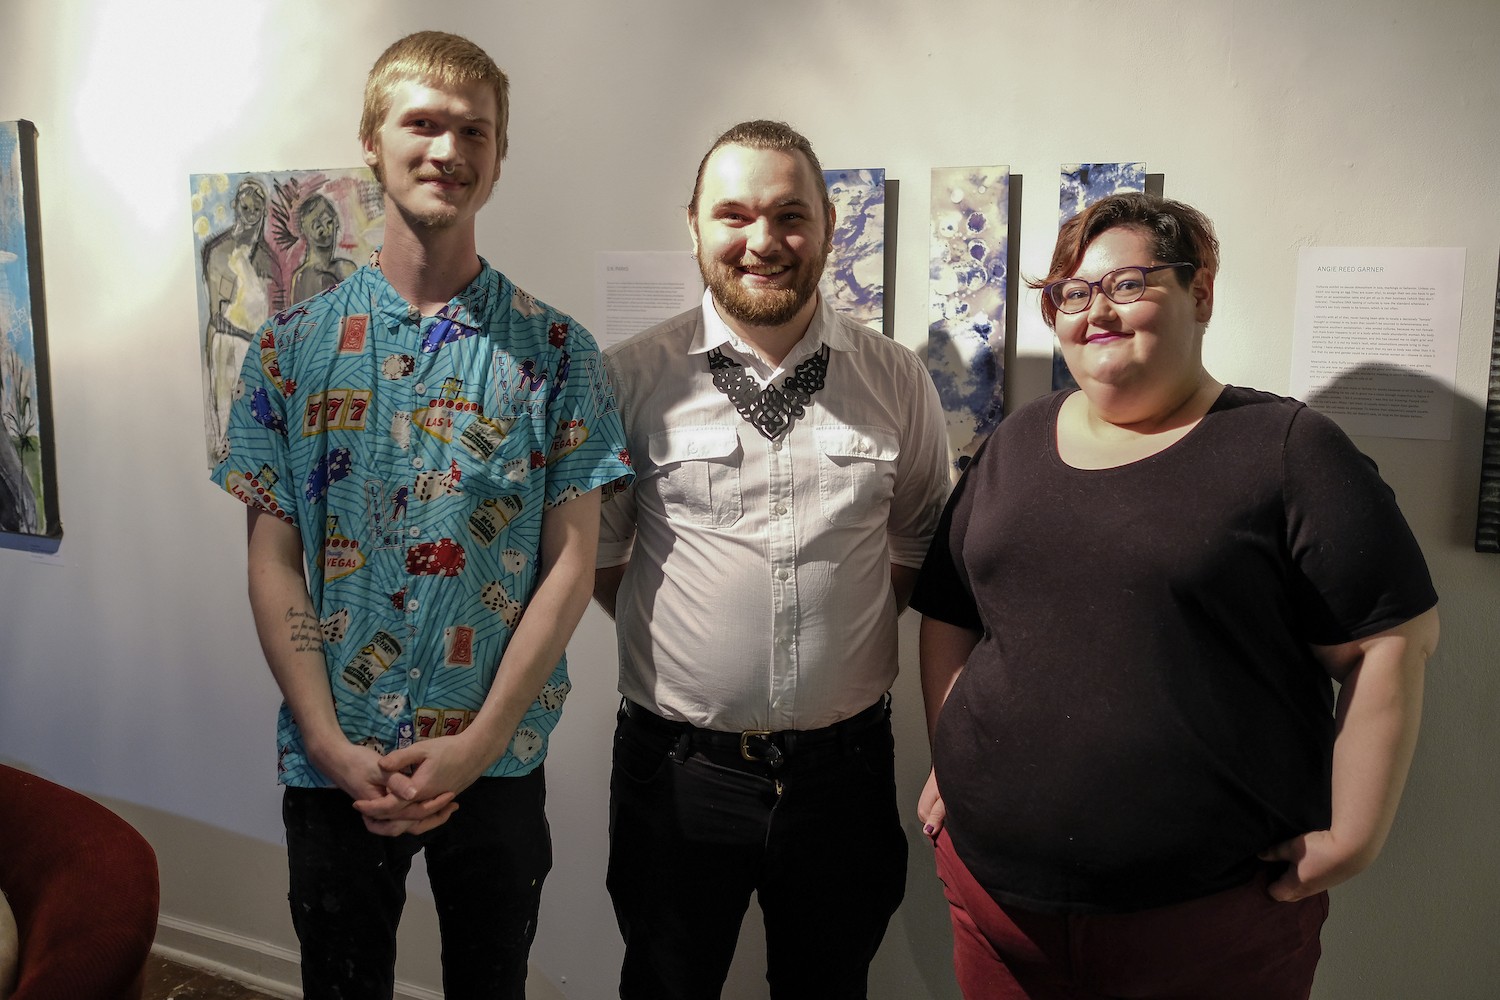 (From left to right) Curators of the Queer Voices art exhibit John Faughender, Kevin Warth, and S.N. Parks pose for a group photo in front of some of the art work.